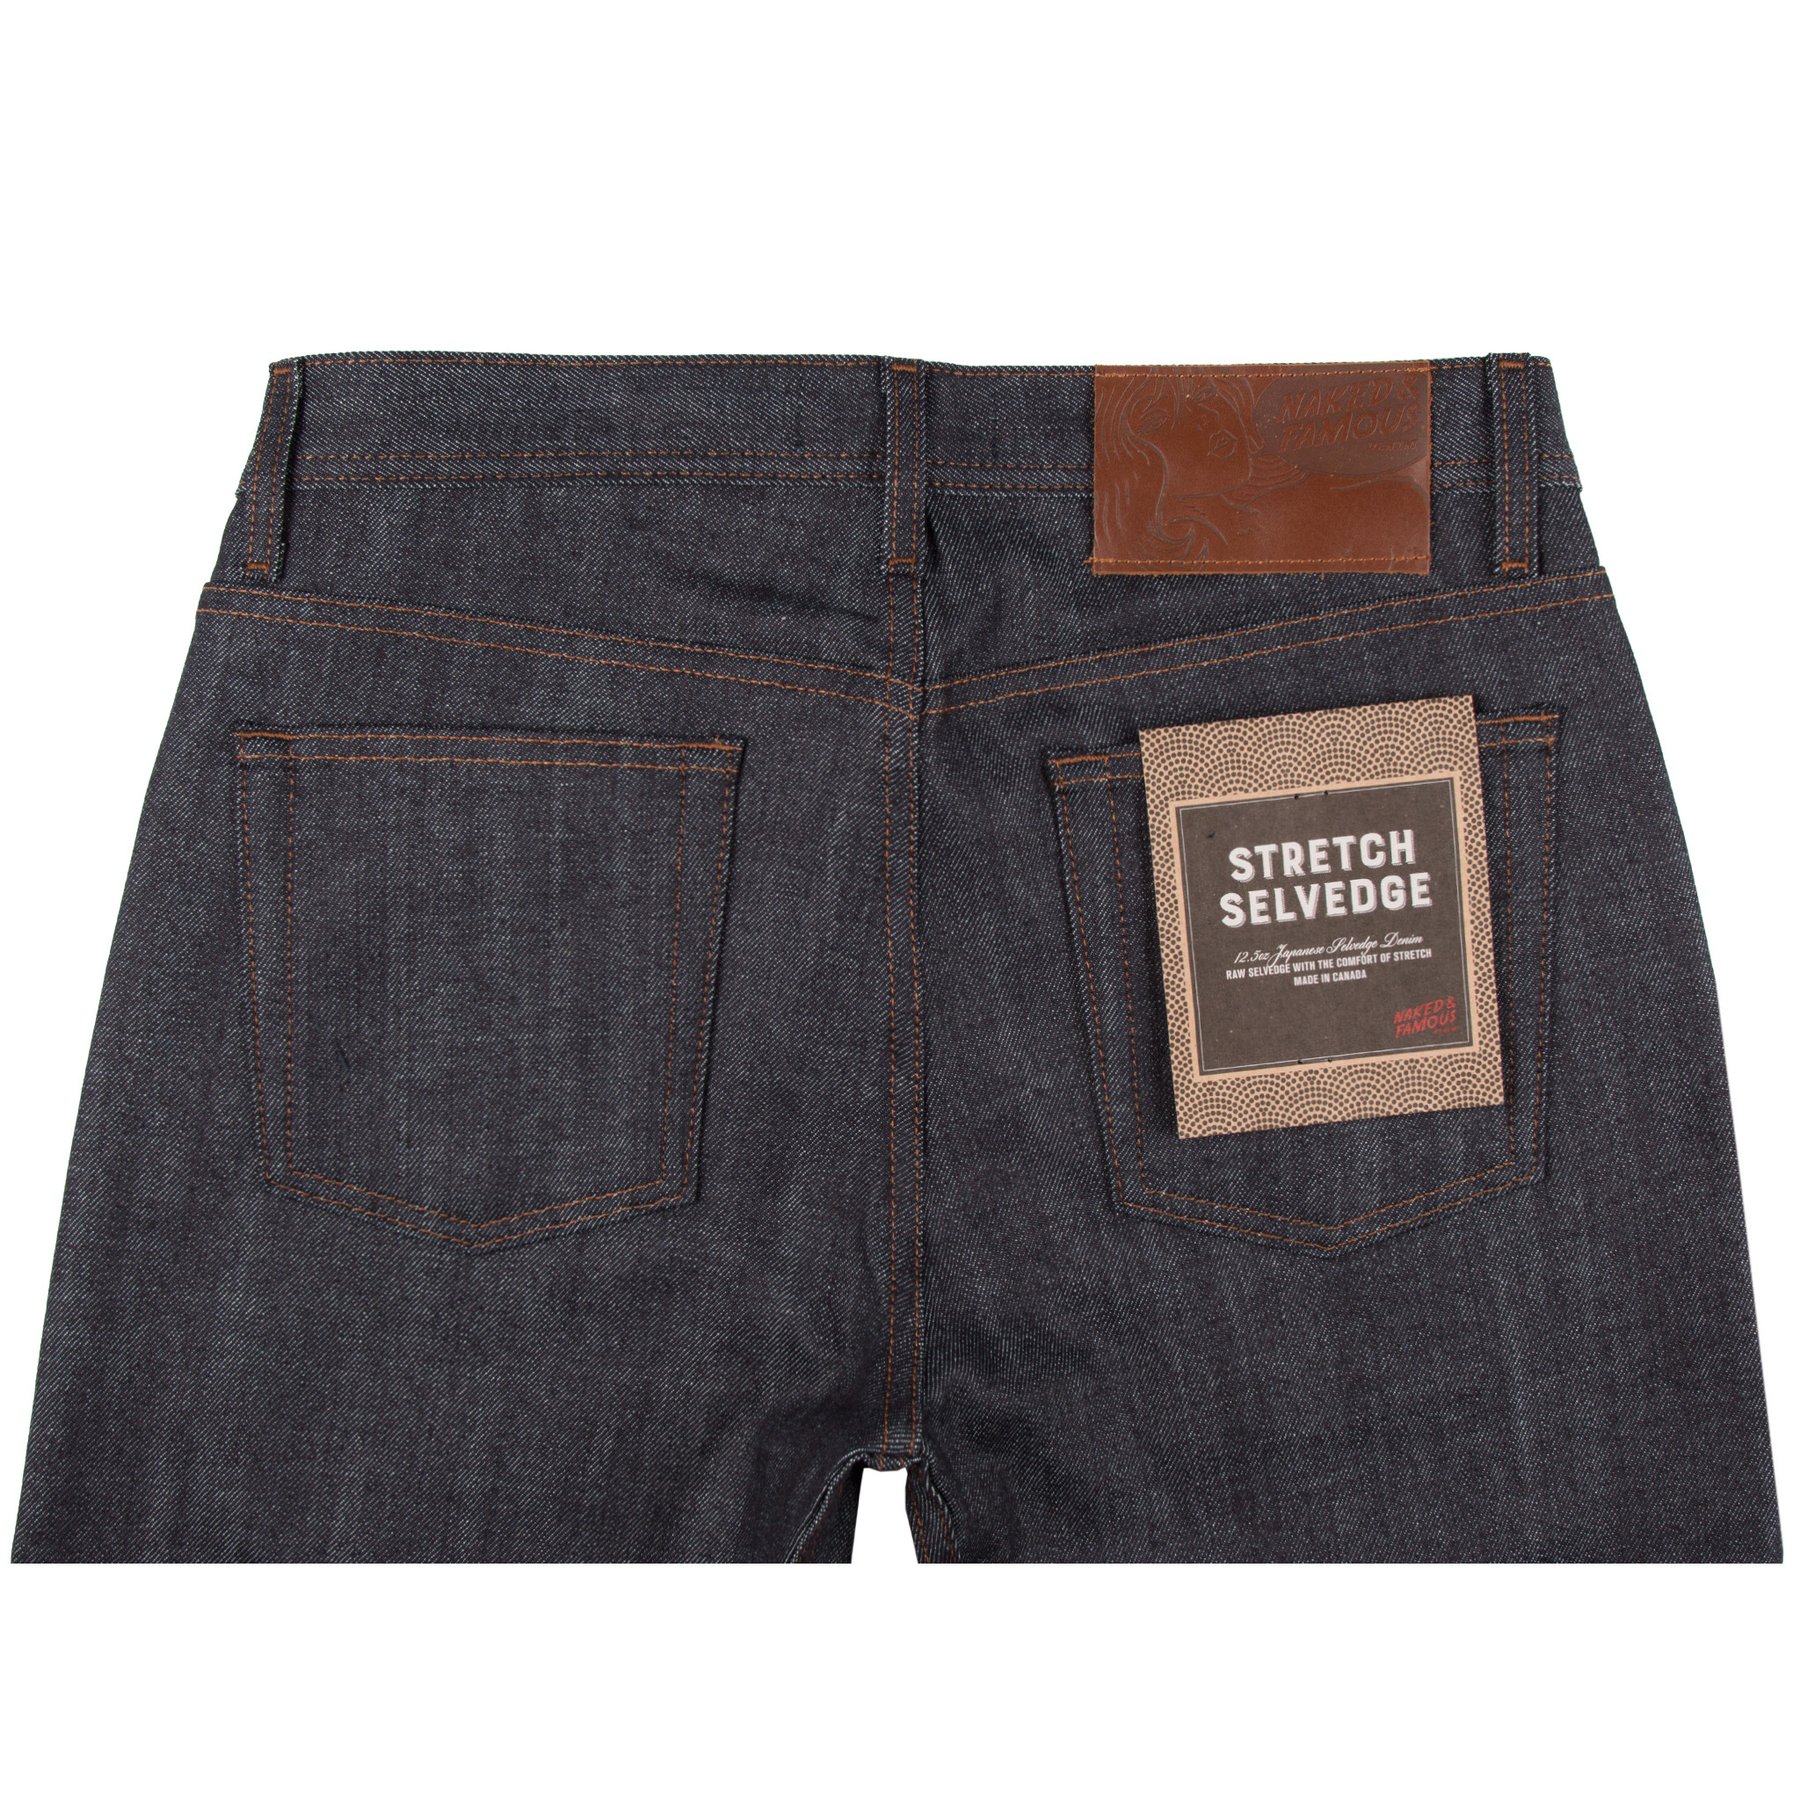  Stretch Selvedge Jeans Back 